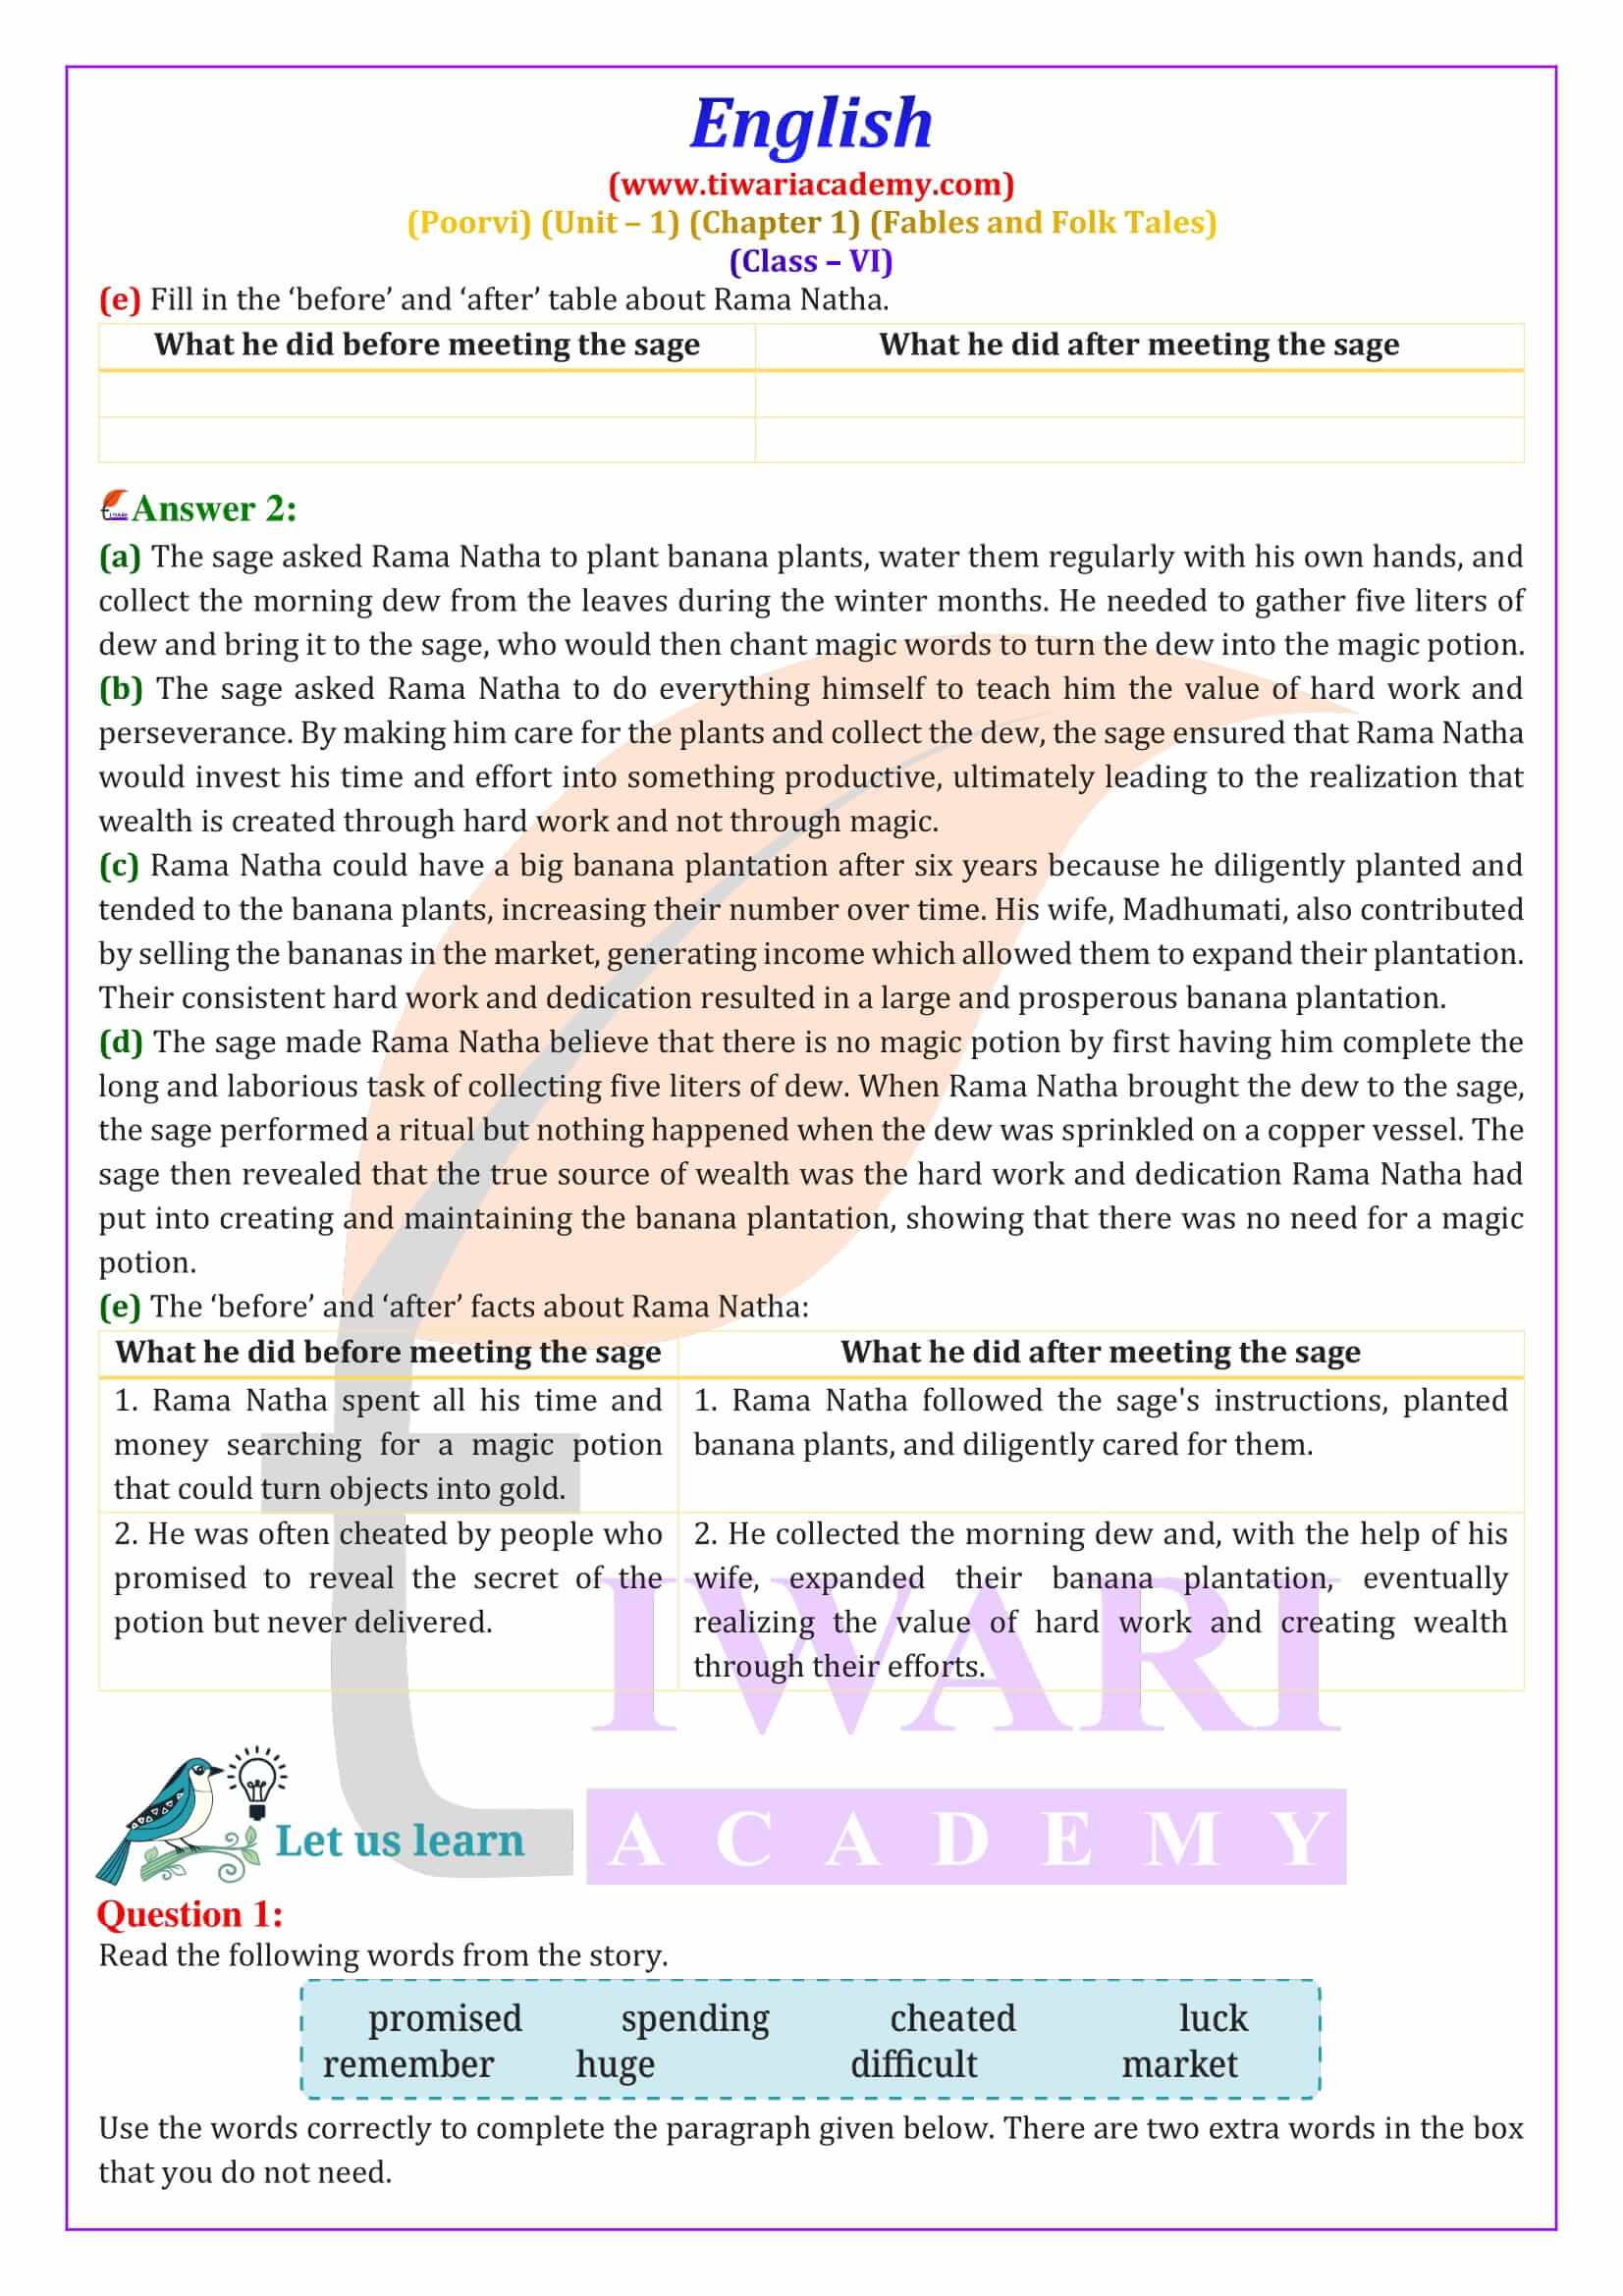 Class 6 English Poorvi Unit 1 Fables and Folk Tales Chapter 1 A Bottle of Dew Question Answers